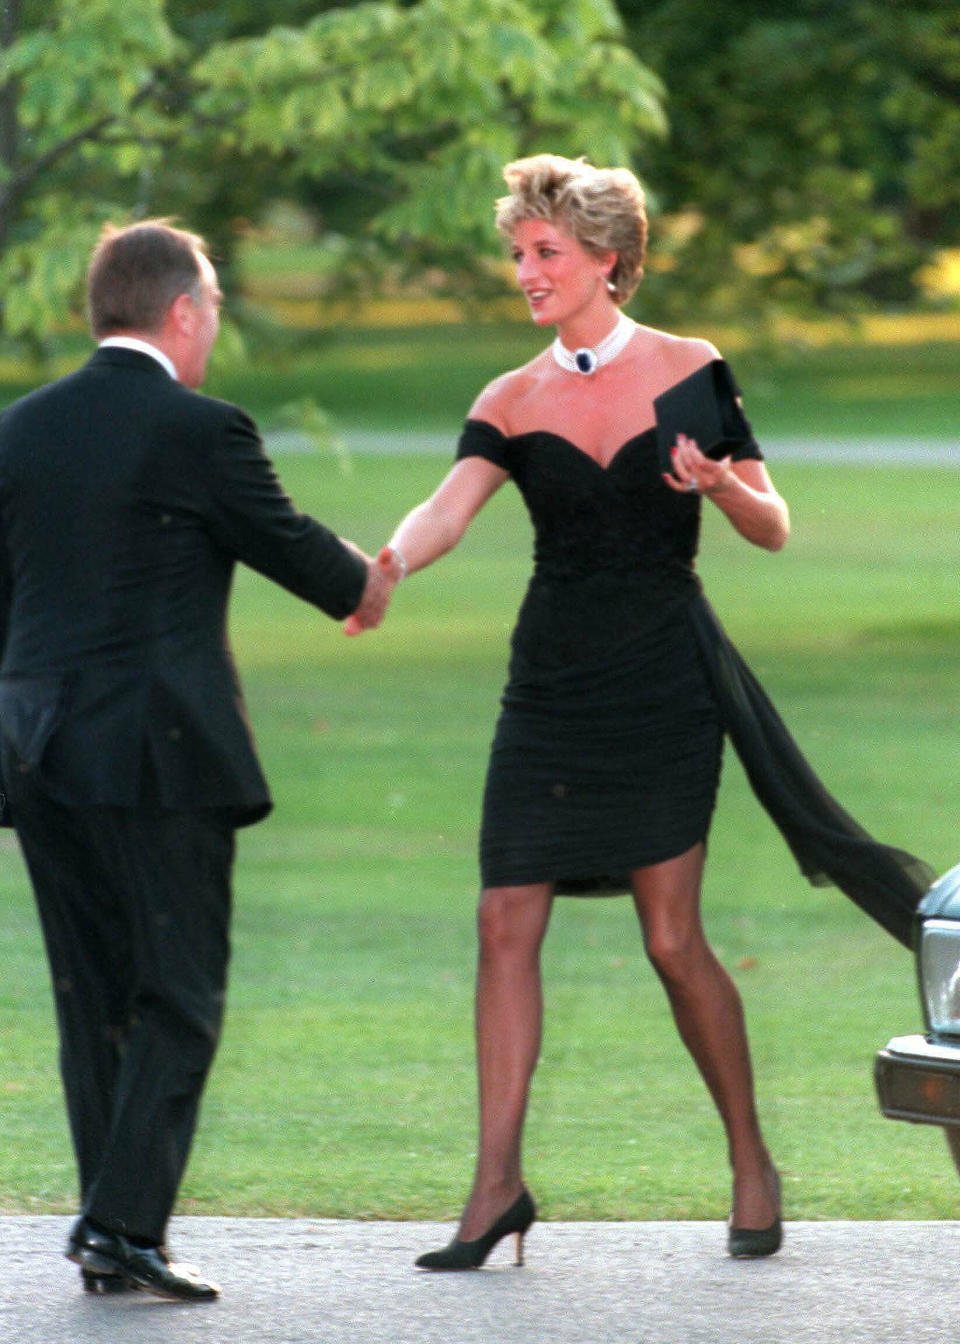 LONDON - NOVEMBER 20:  Diana, Princess of Wales, wearing a stunning black dress commissioned from Christina Stambolian, attends the Vanity Fair party at the Serpentine Gallery on November 20, 1994 in London, England.  The famous black 